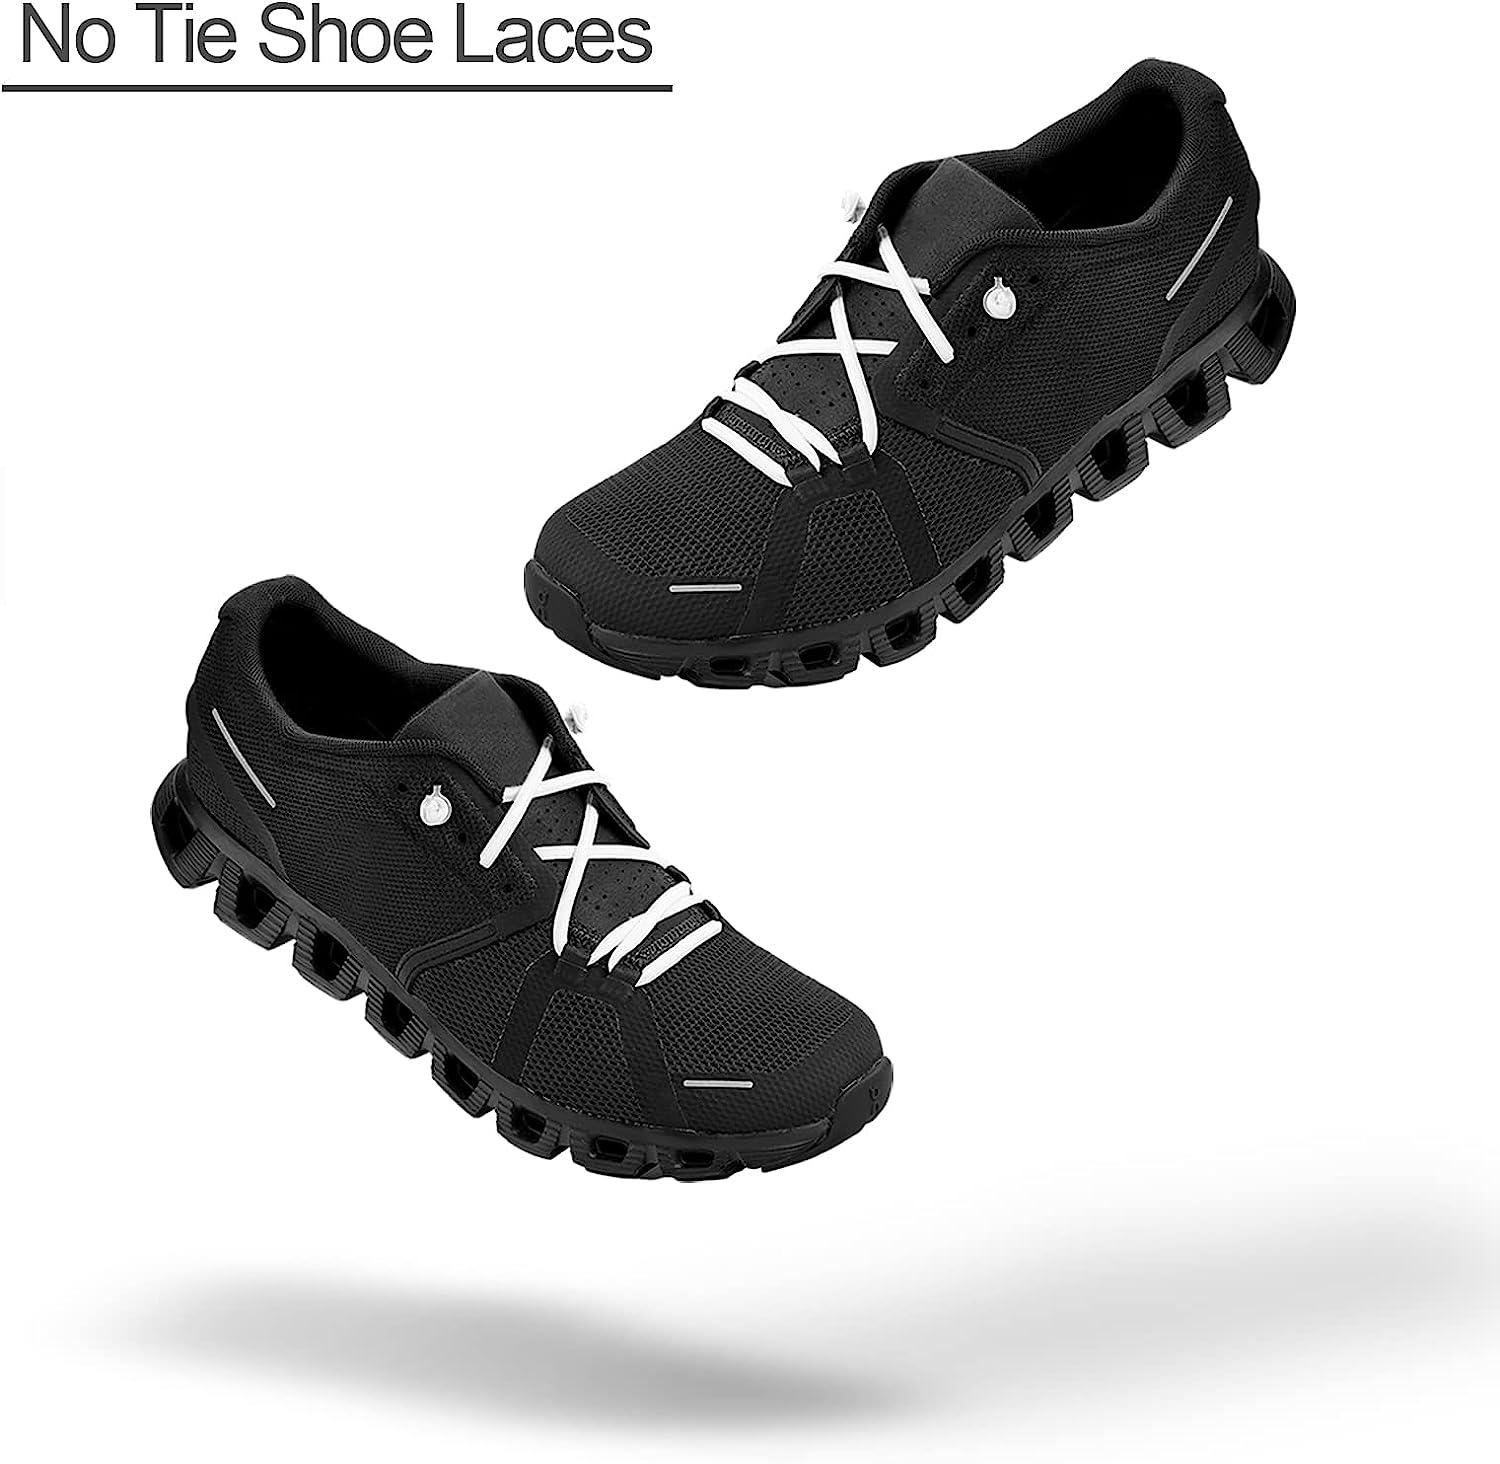 Laceez No Tie White Shoelace 2 Pack - Black - Small